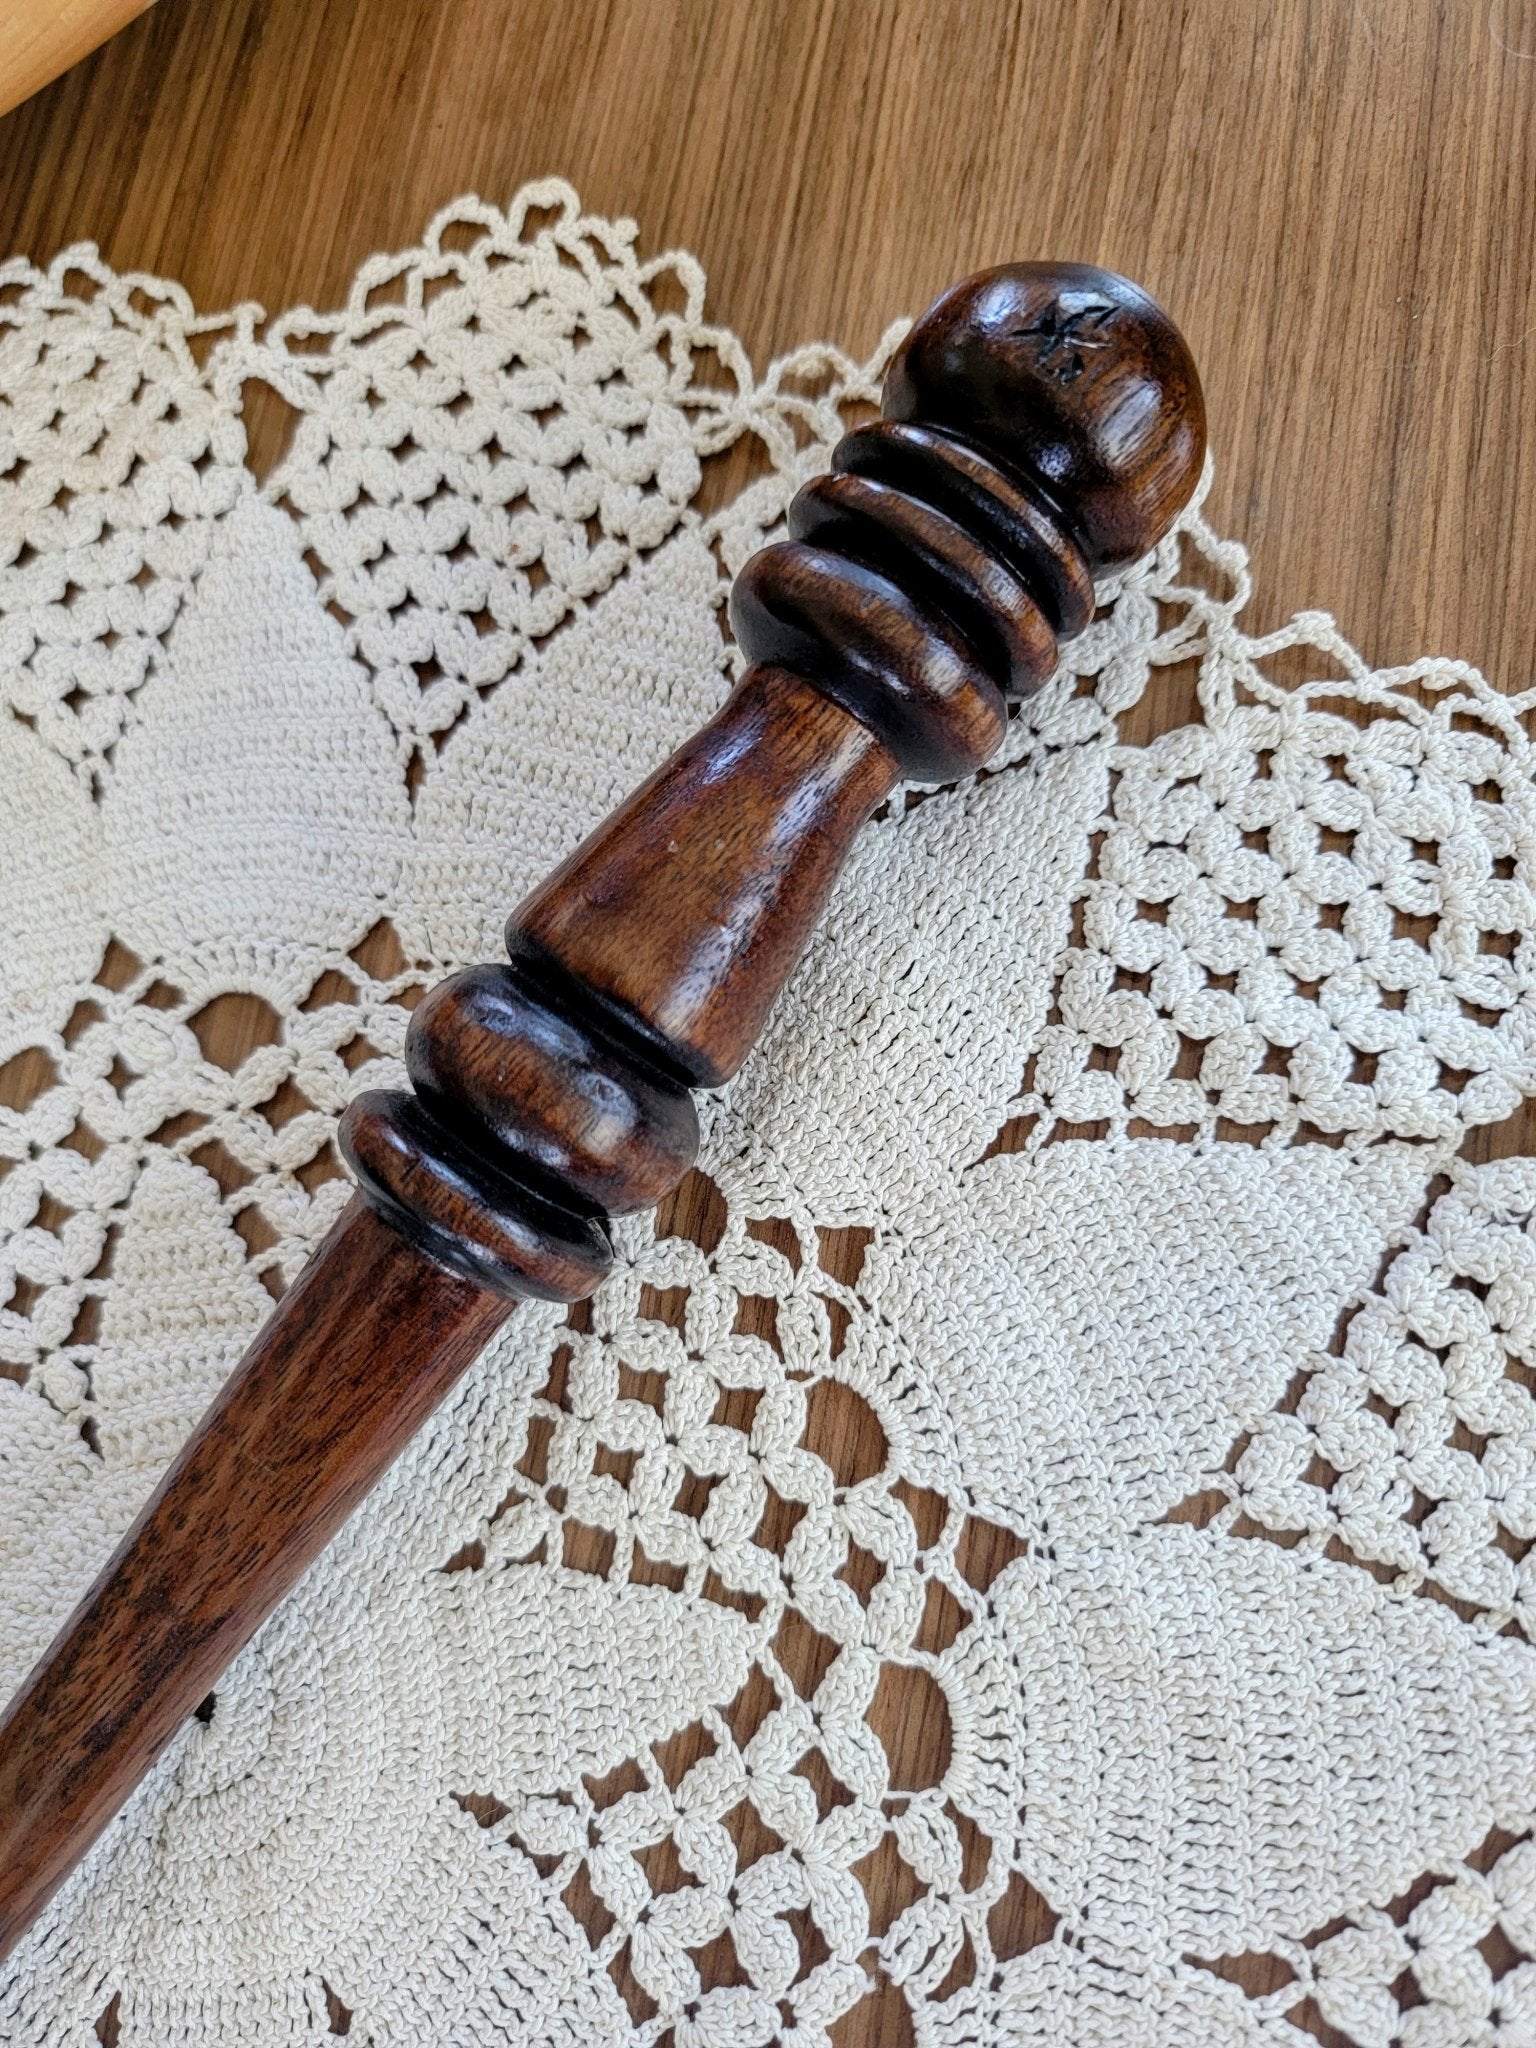 Handcrafted Wooden Wands - Smash's Stashes